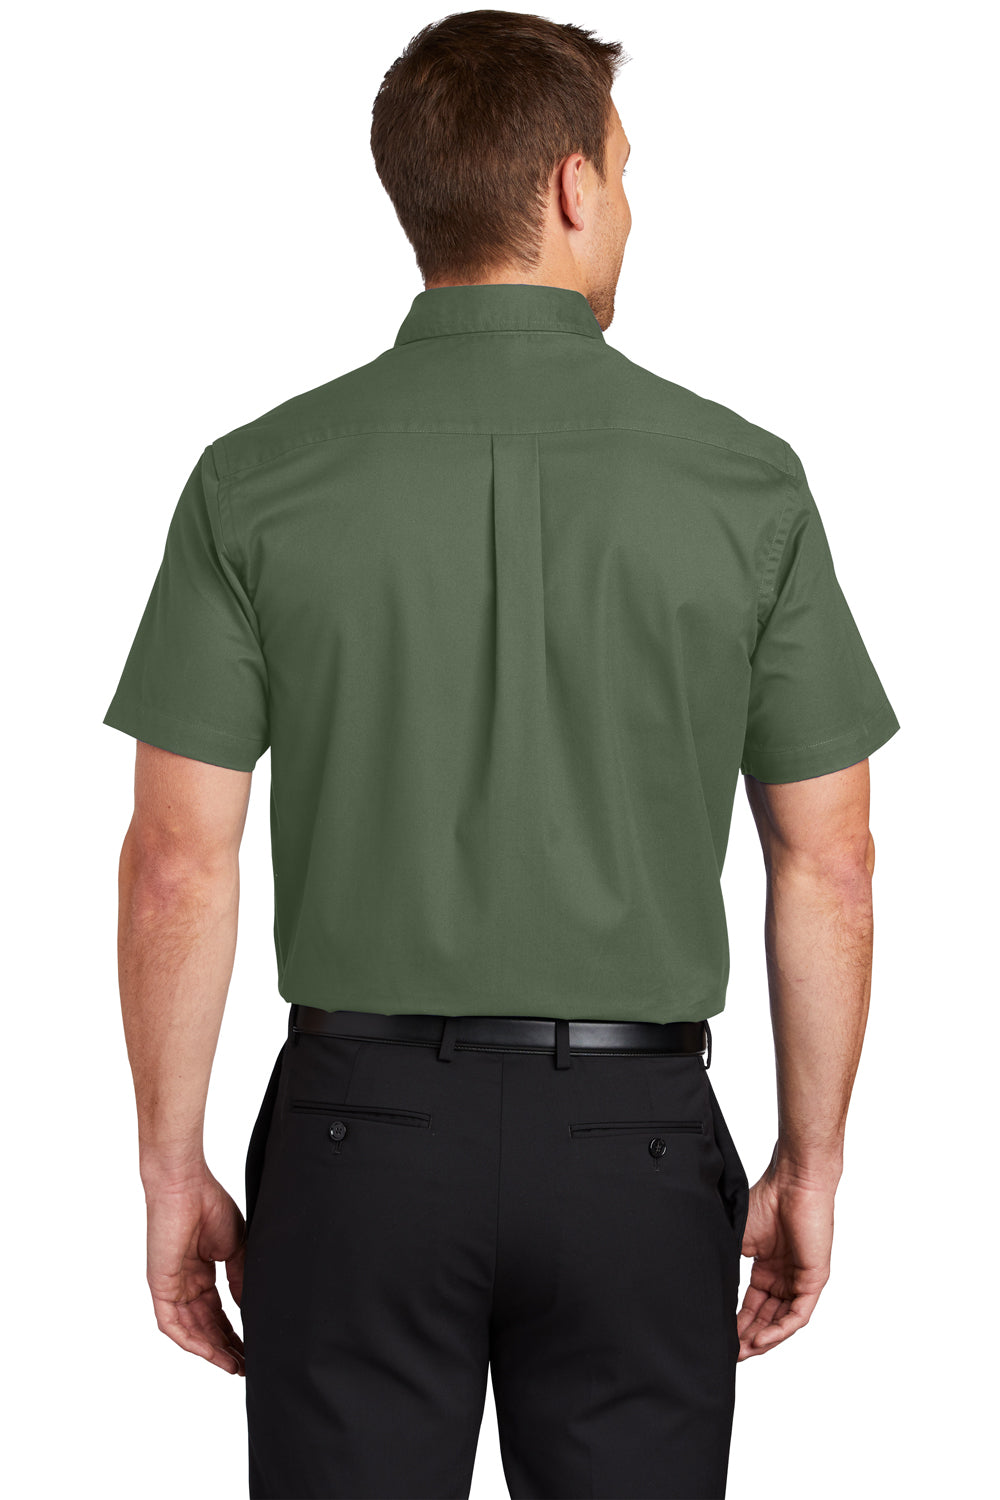 Port Authority S508/TLS508 Mens Easy Care Wrinkle Resistant Short Sleeve Button Down Shirt w/ Pocket Clover Green Back